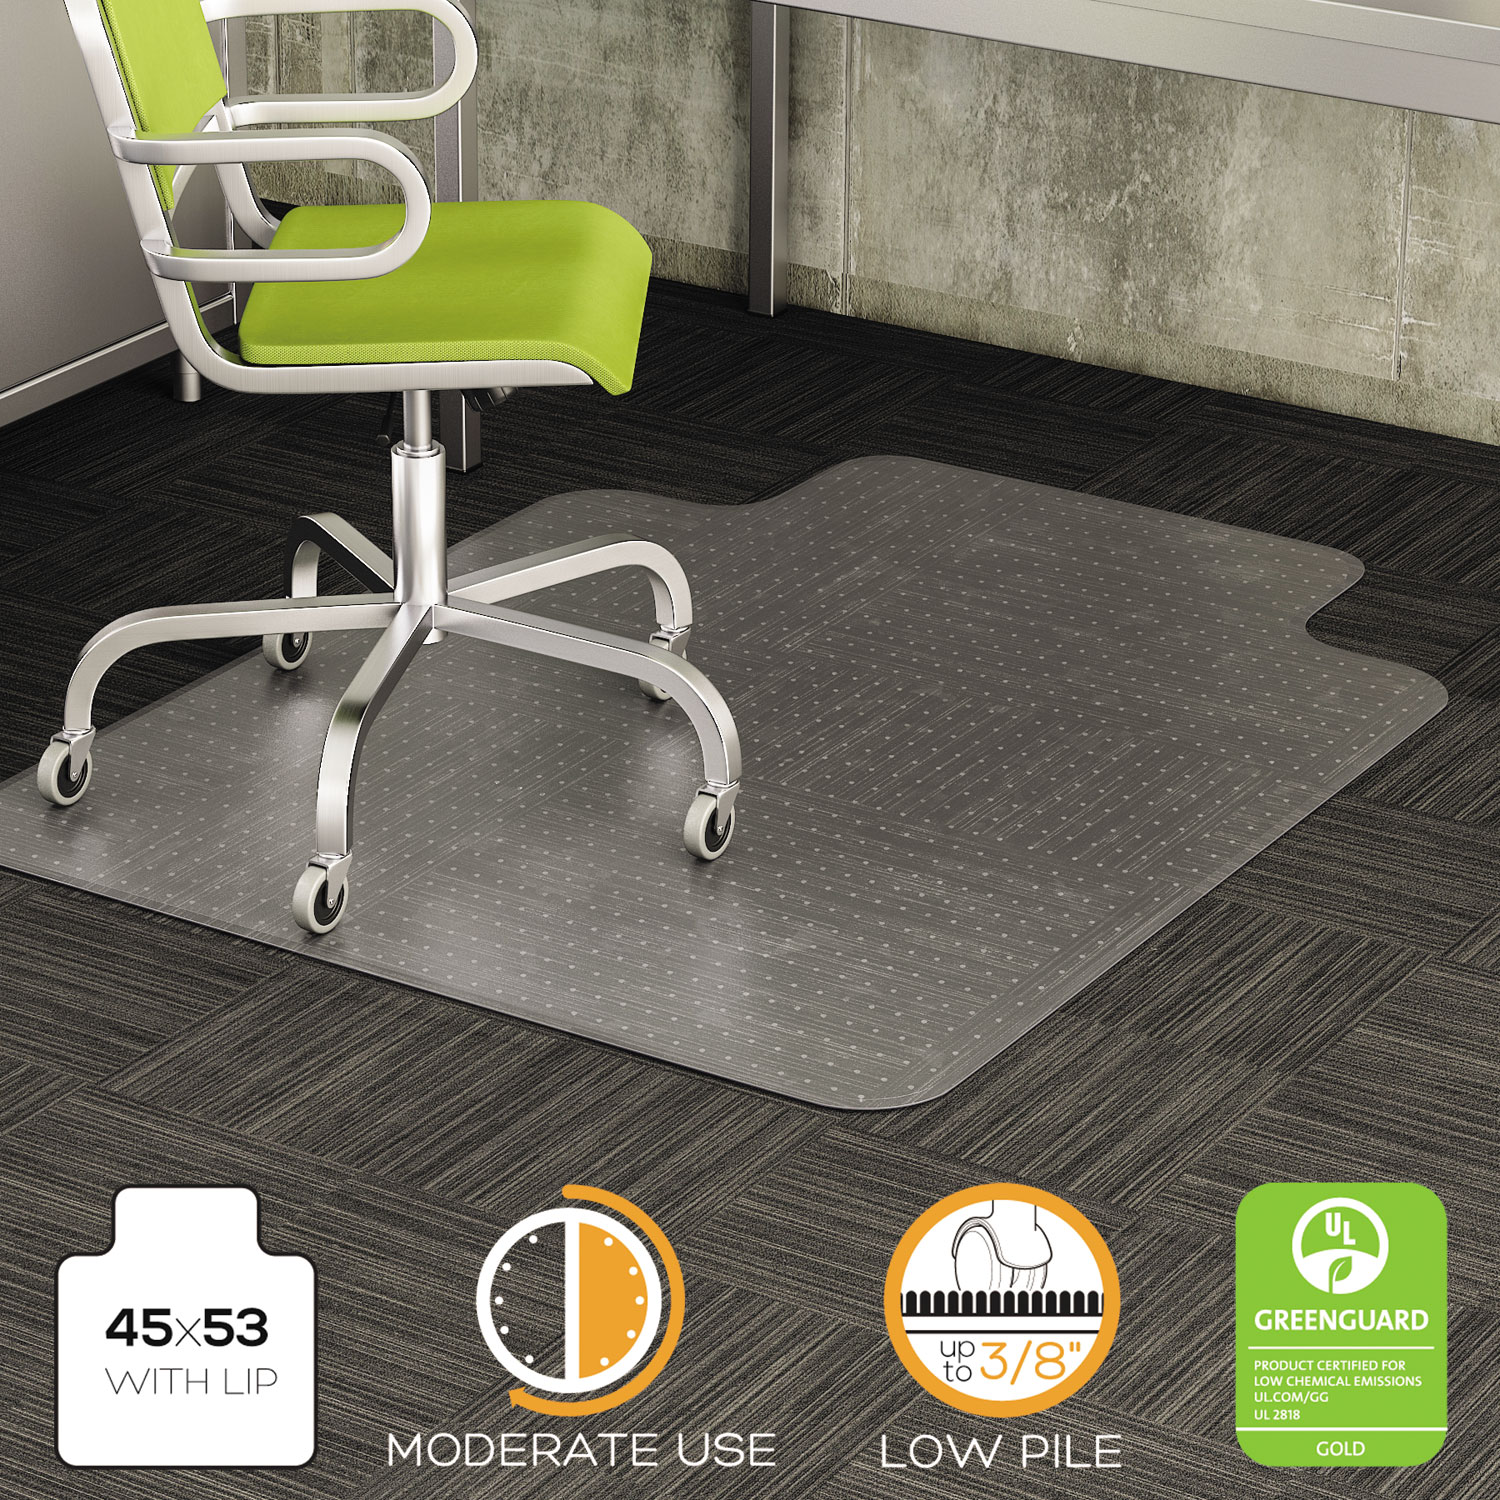  deflecto CM13233 DuraMat Moderate Use Chair Mat for Low Pile Carpet, 45 x 53, Wide Lipped, Clear (DEFCM13233) 